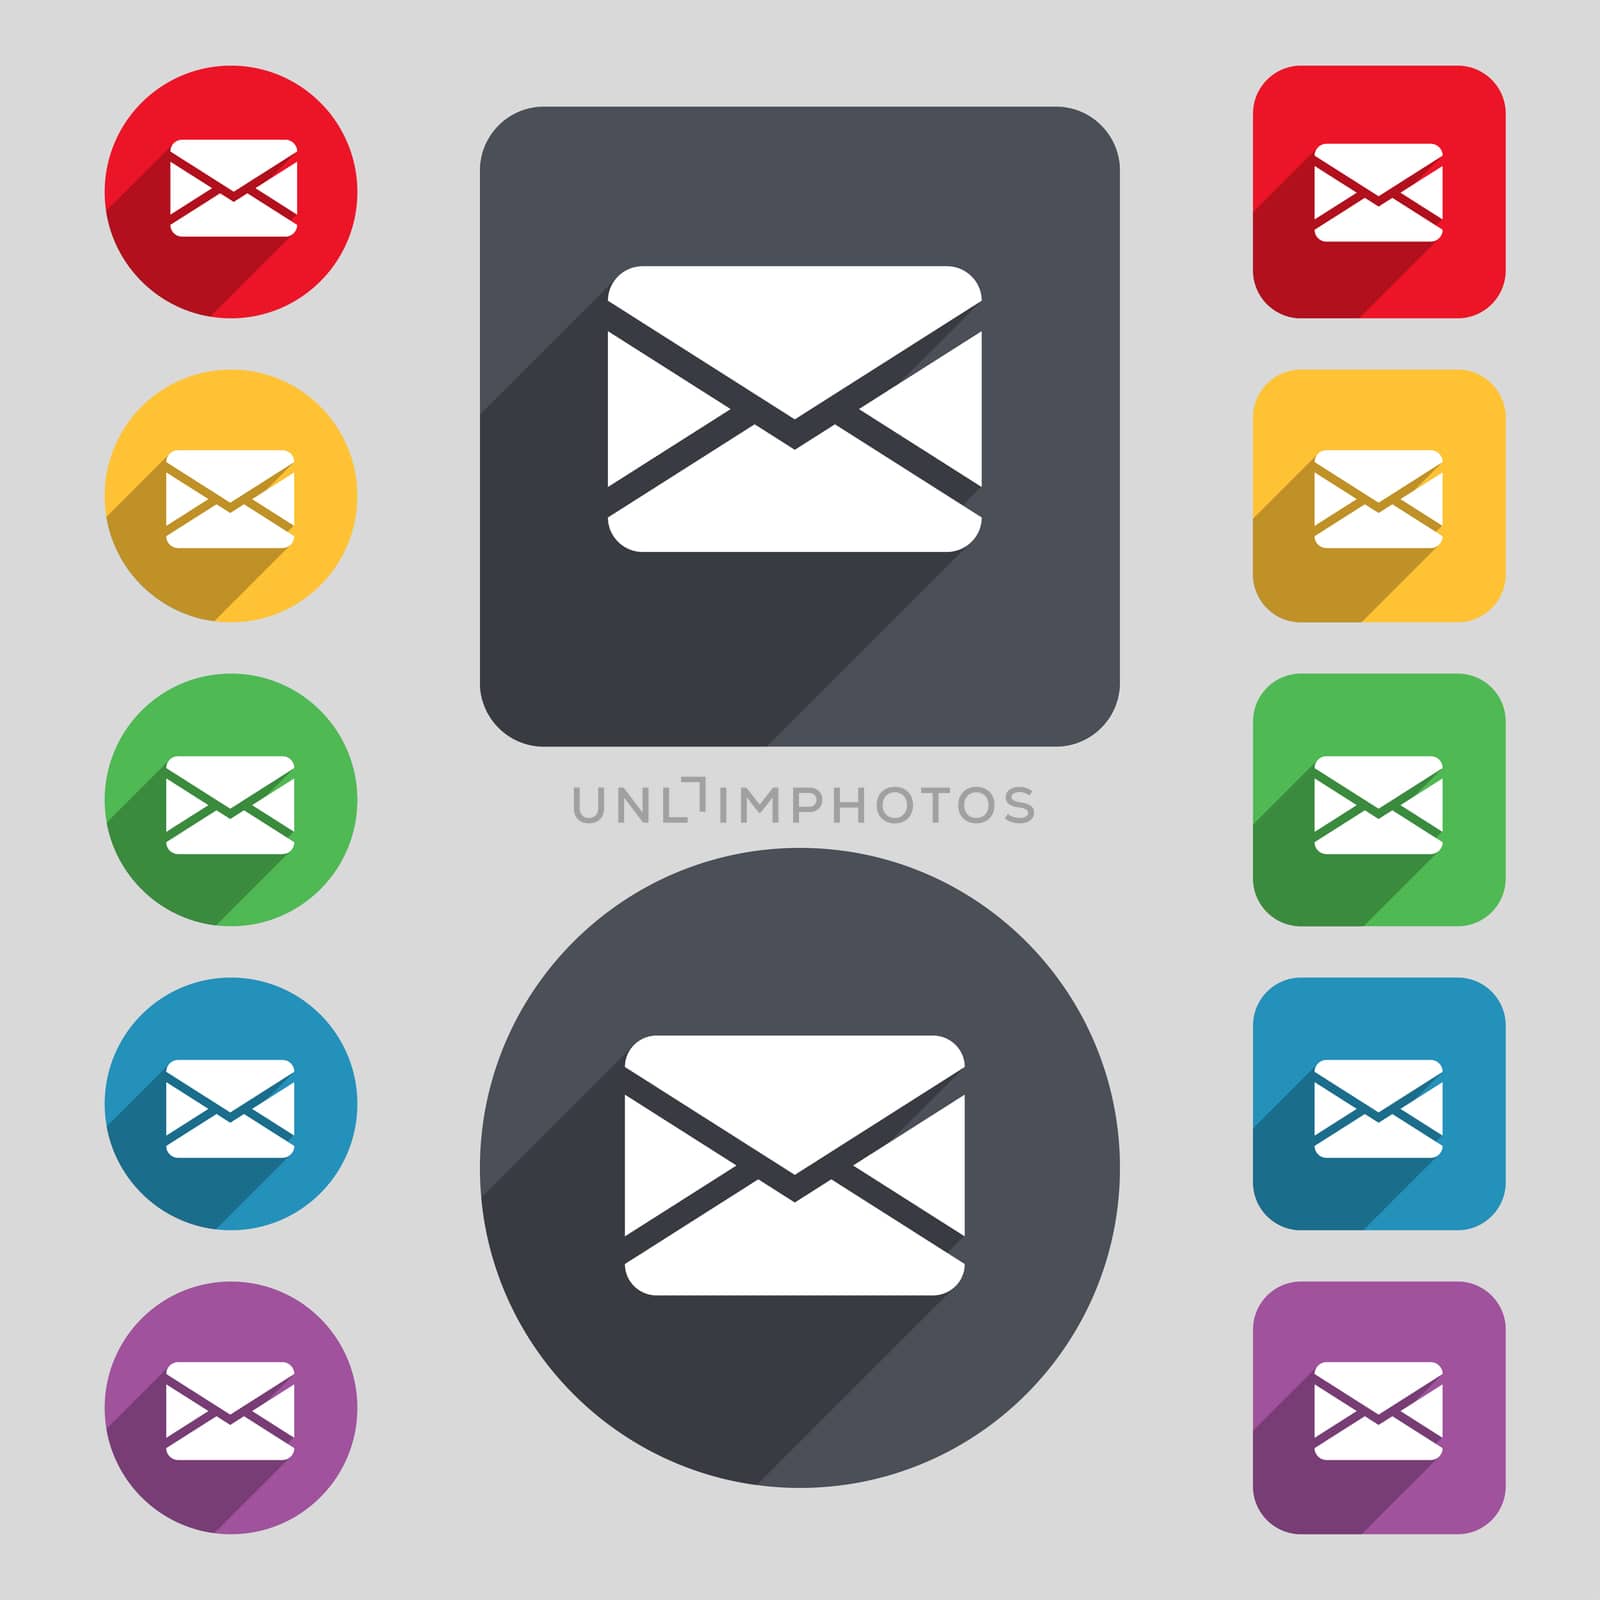 Mail, Envelope, Message icon sign. A set of 12 colored buttons and a long shadow. Flat design. illustration